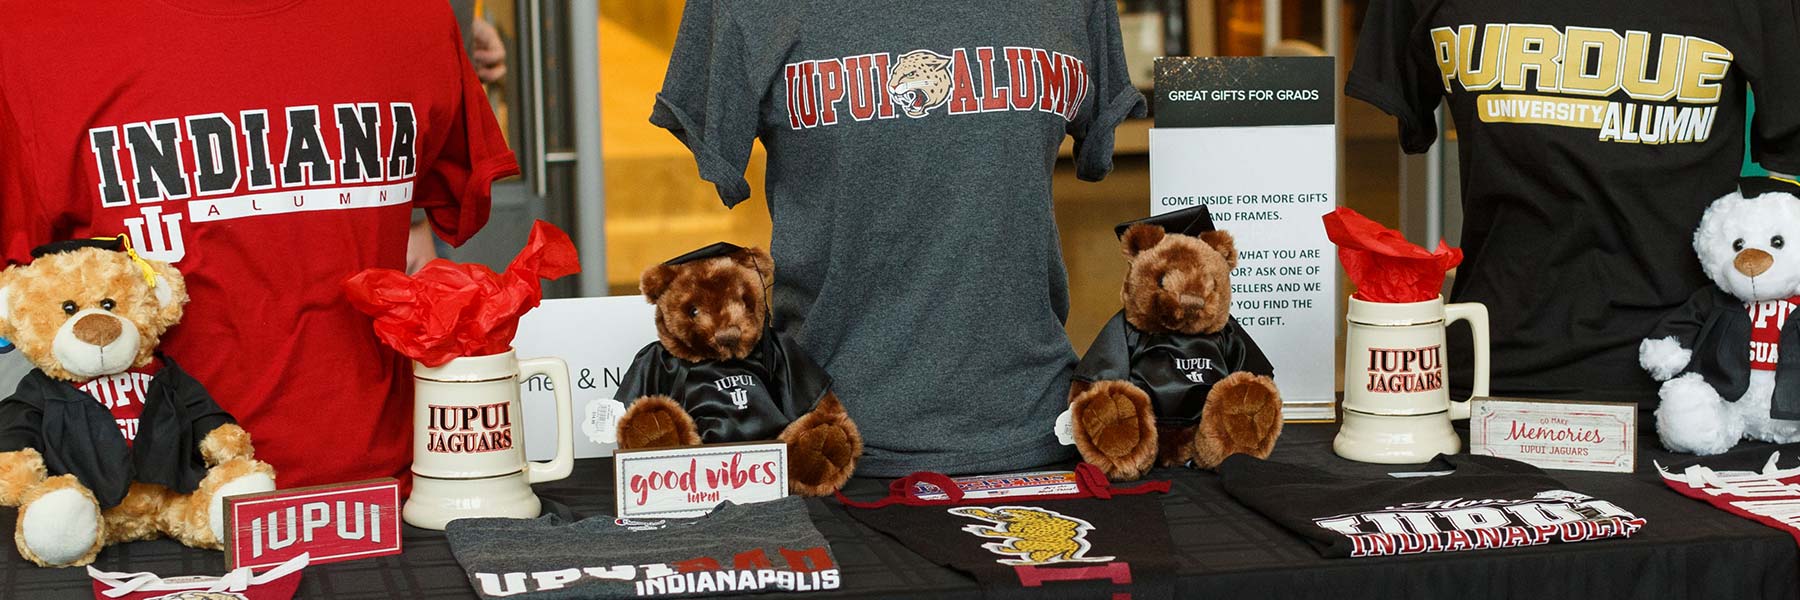 Tabletop display of IU and Purdue shirts, mugs, stuffed animals and other memorabilia items.